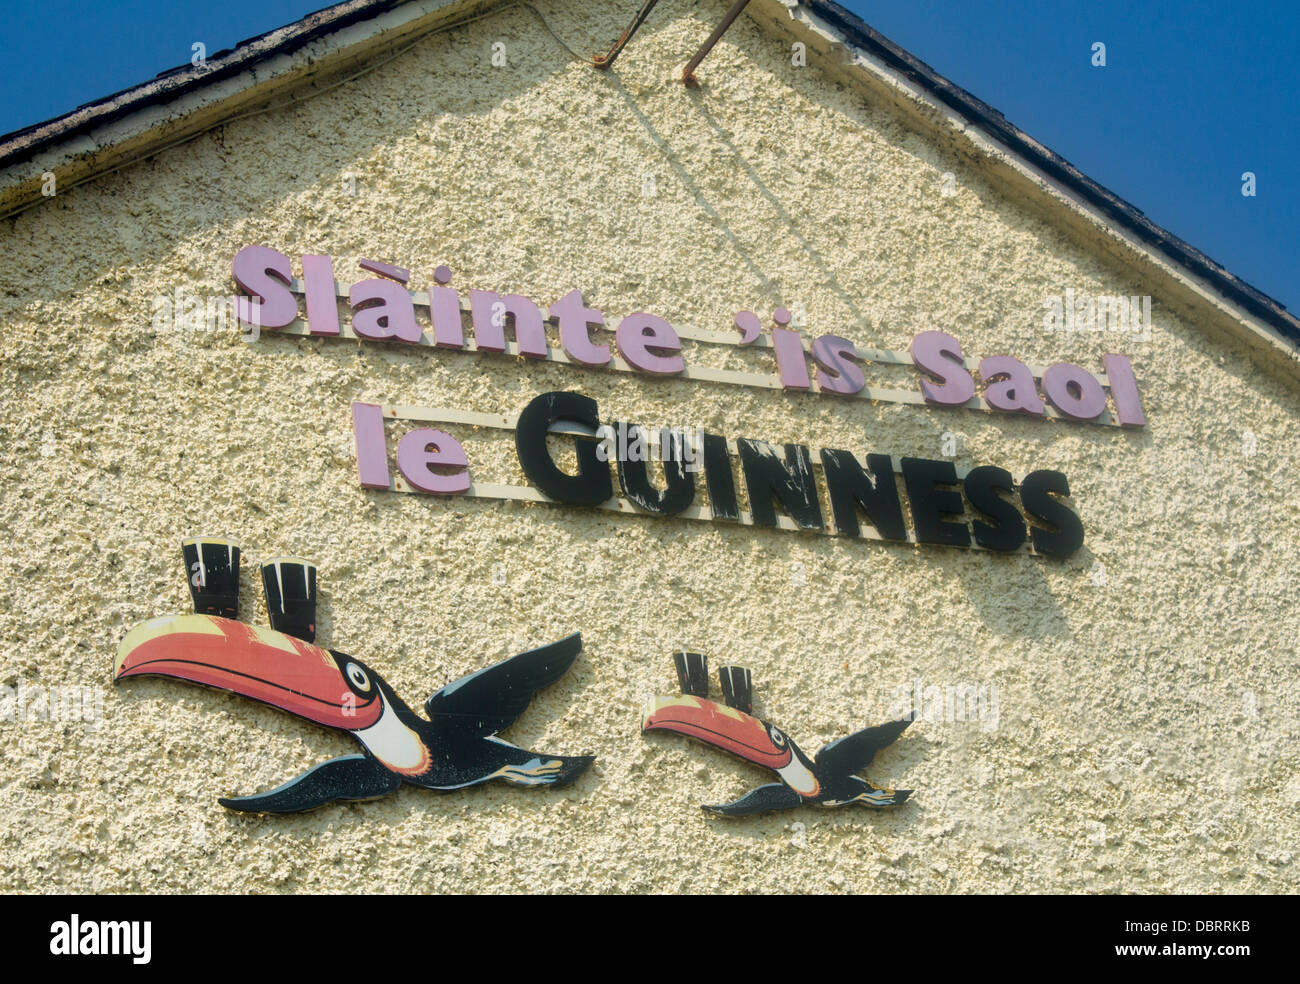 Guinness flying toucans wall art and sign in Gaelic on pub exterior Spiddal County Galway Republic of Ireland Stock Photo